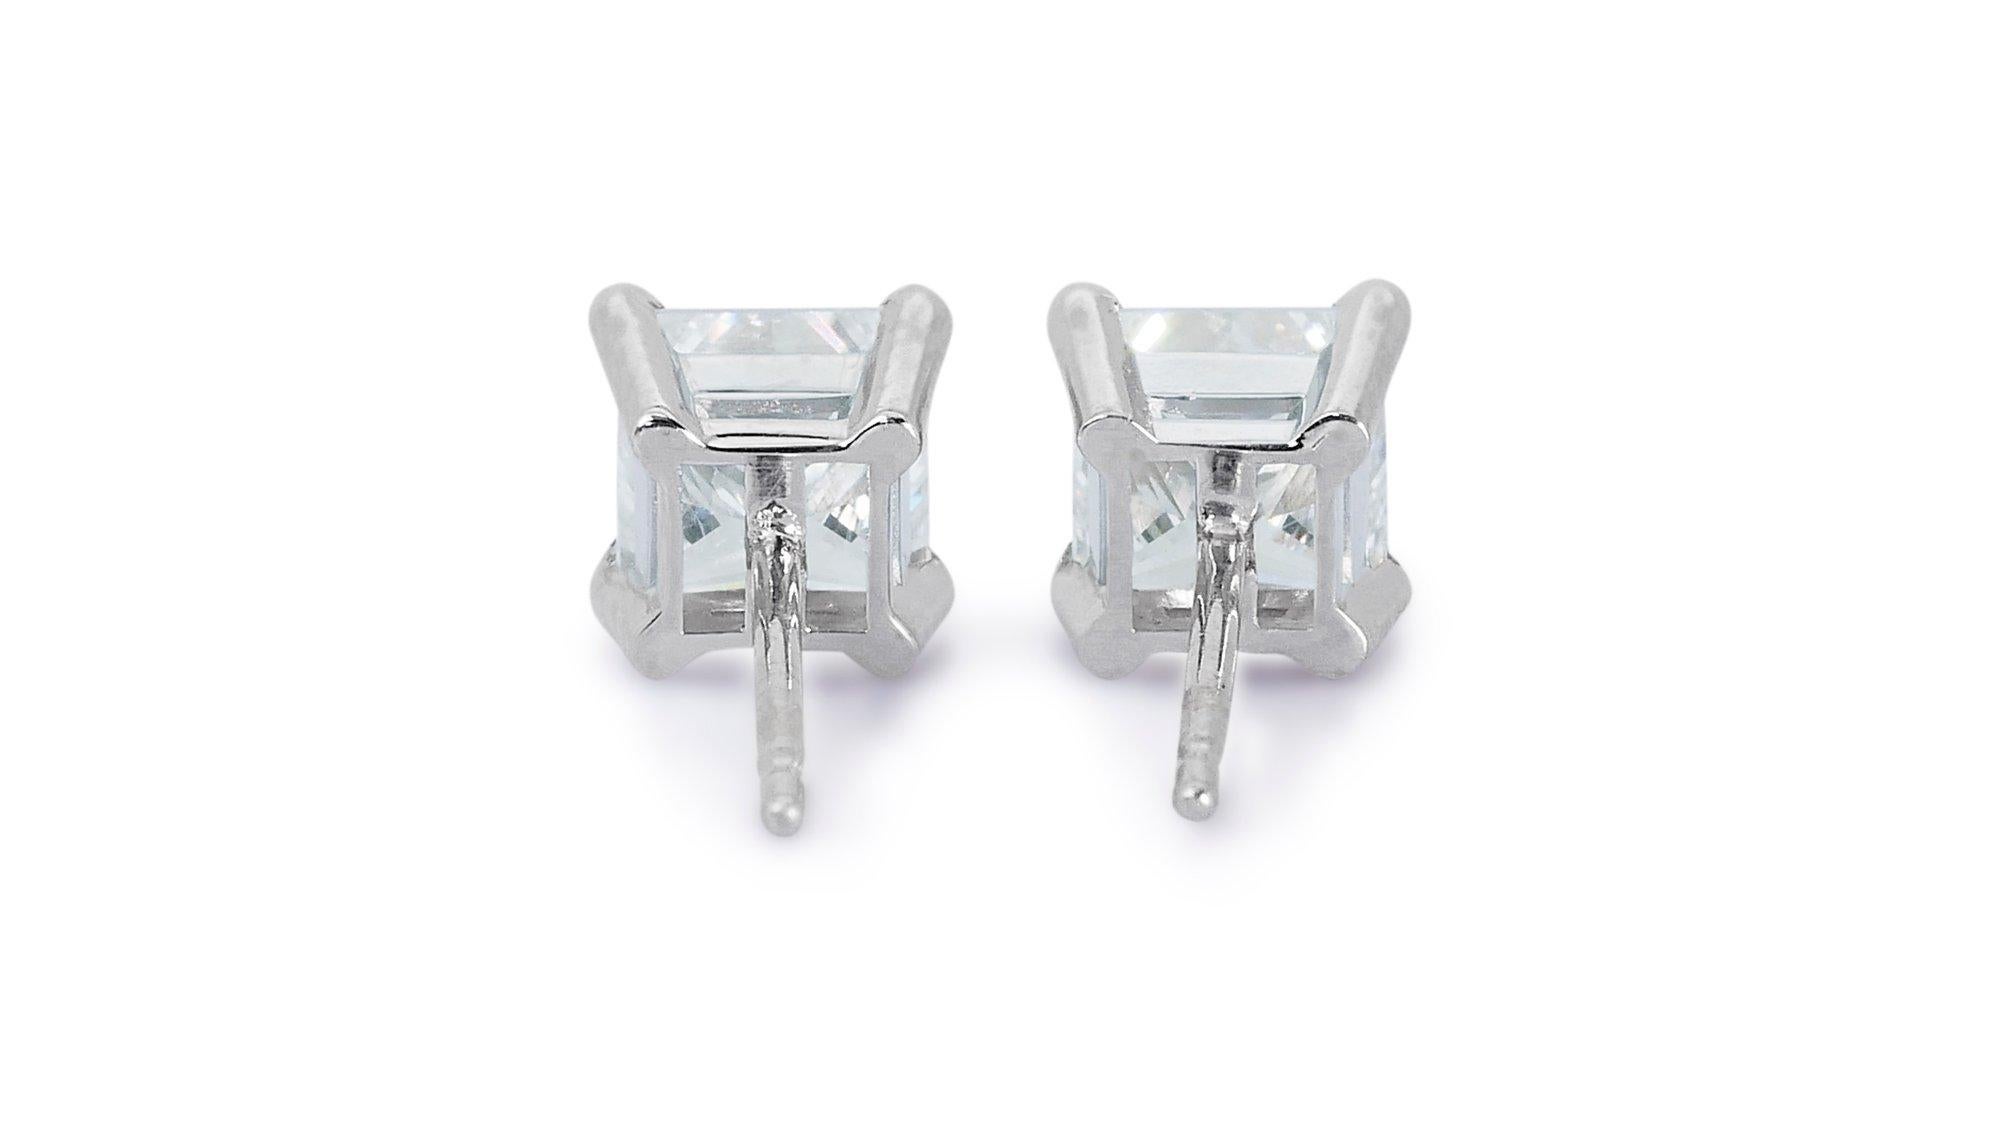 Classic 2.00ct Diamond Stud Earrings in 18k White Gold - GIA Certified For Sale 3